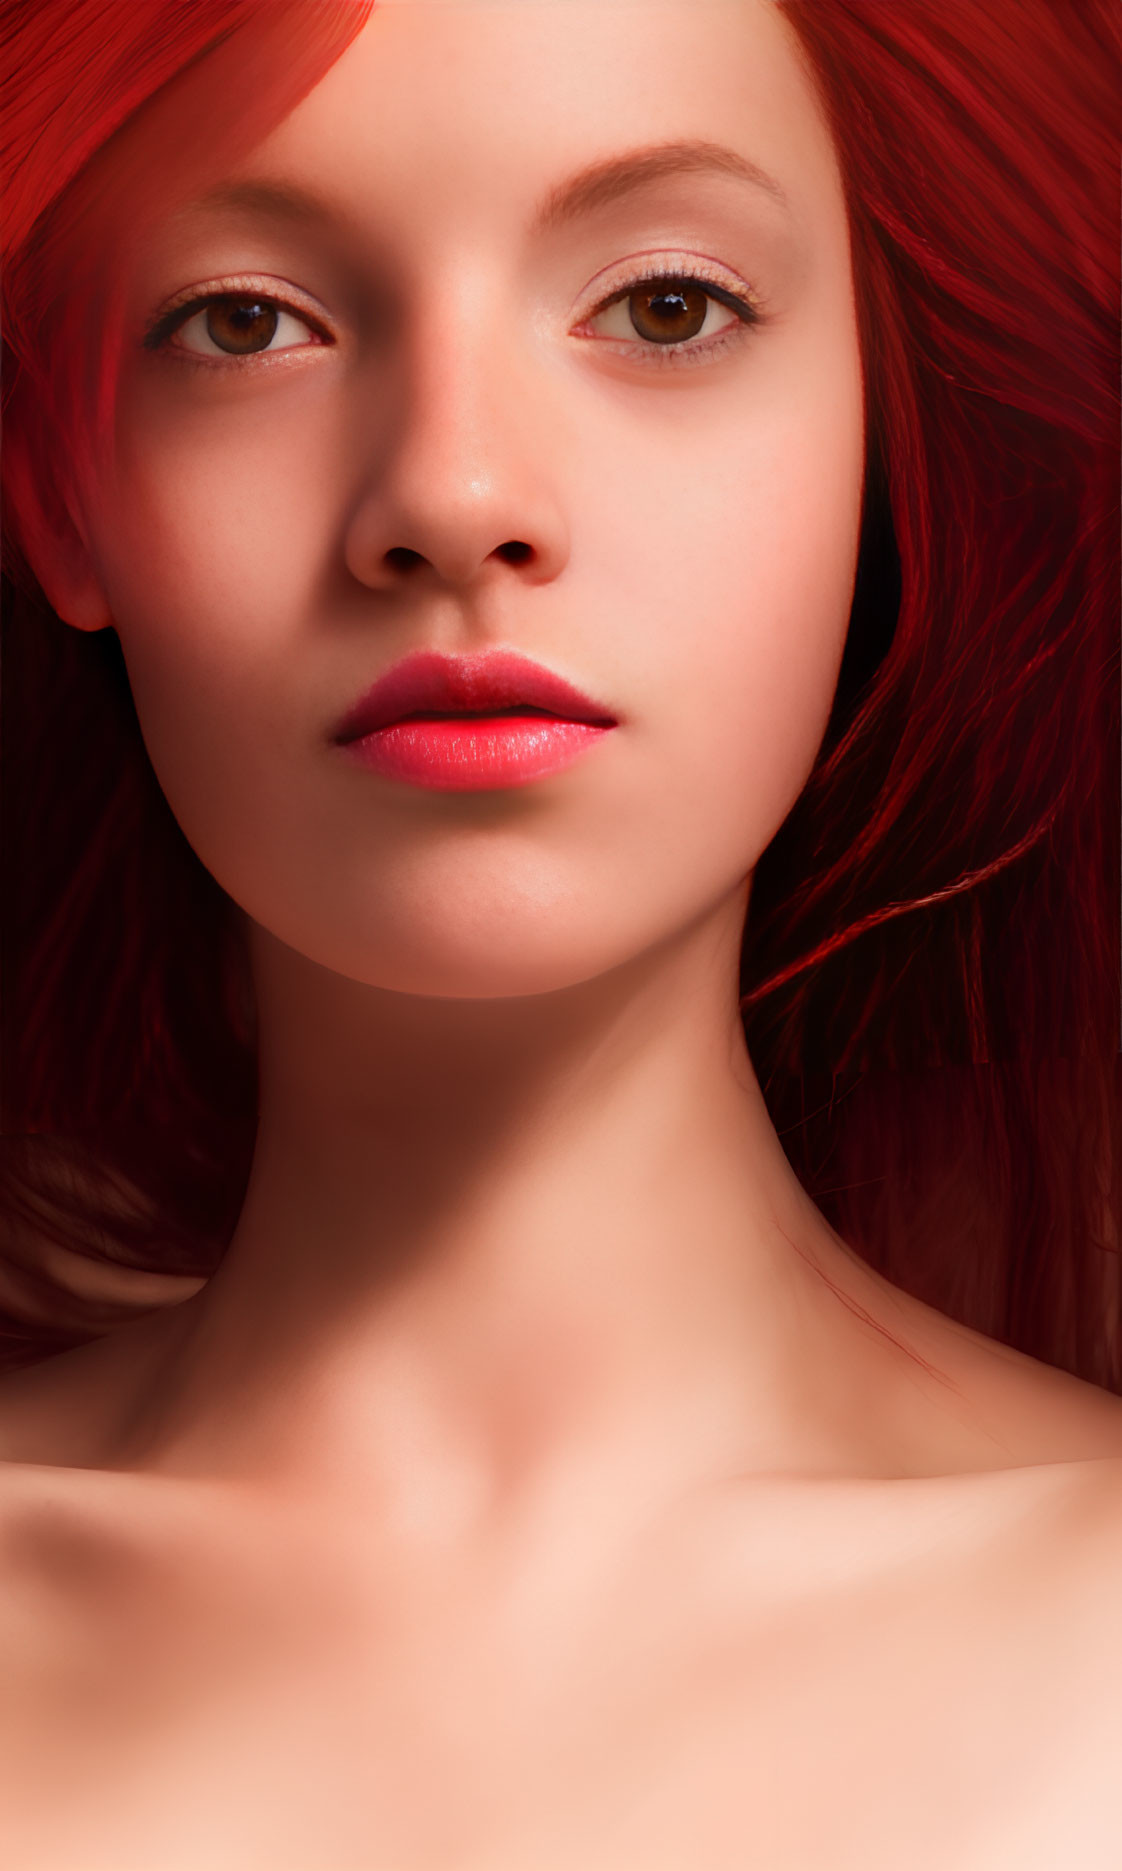 Portrait of a Woman with Red Hair, Amber Eyes, and Red Lips